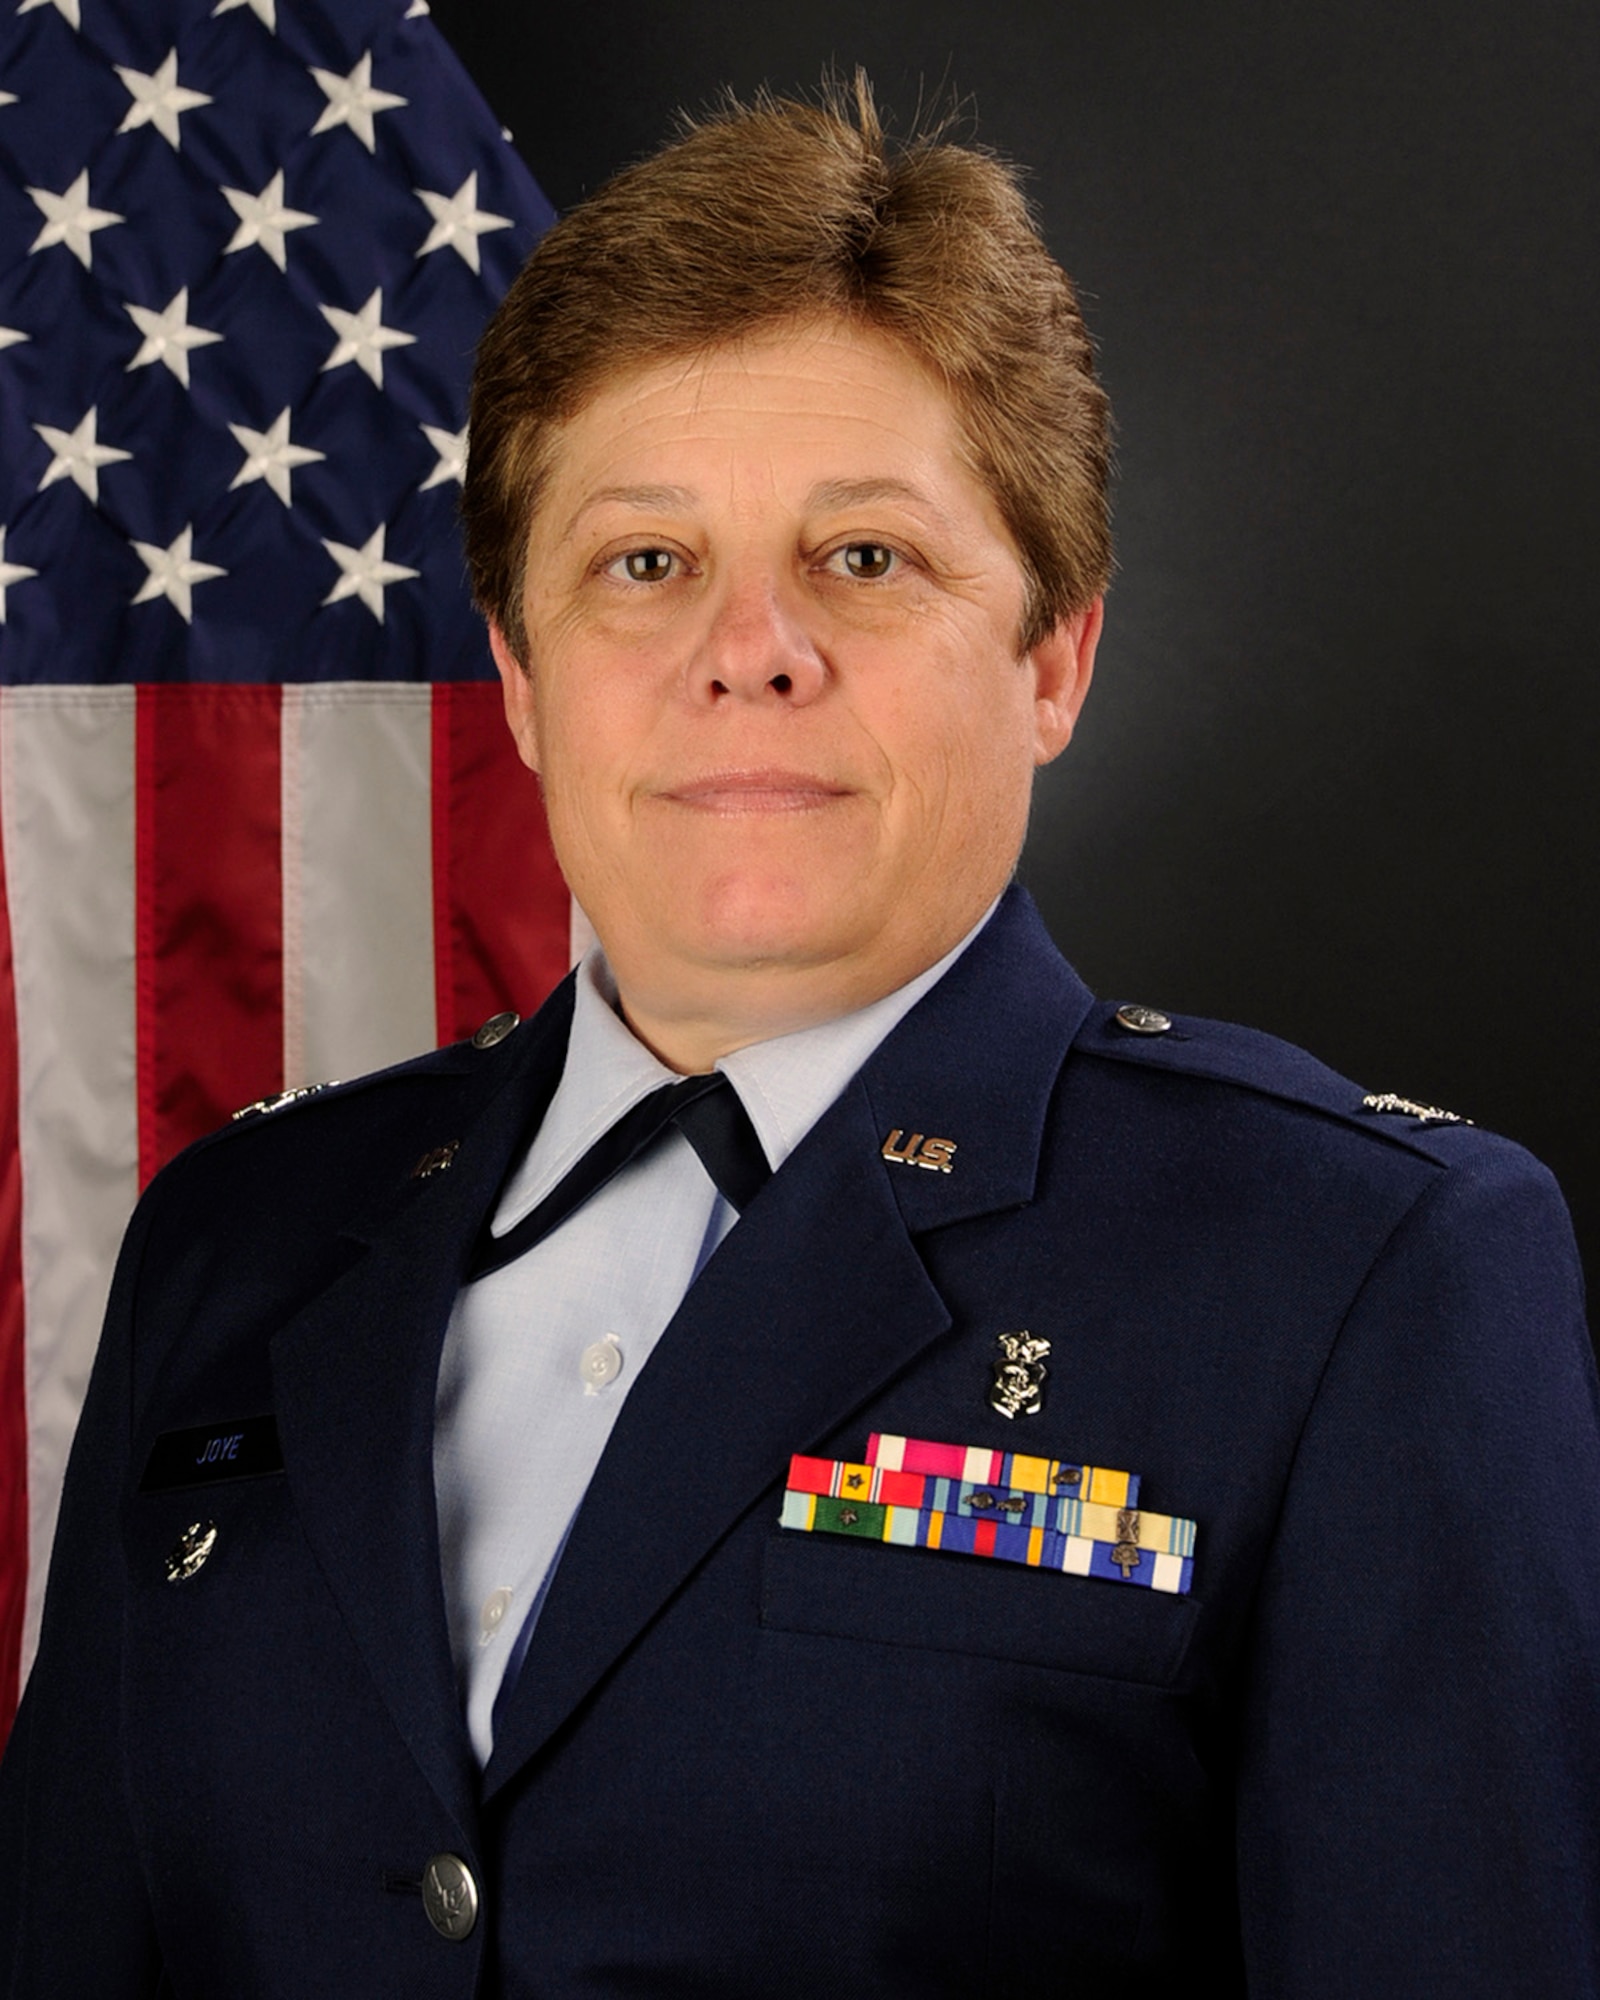 U.S. Air Force Col. Kim Joye, commander of the 169th Medical Group at McEntire Joint National Guard Base, S.C., May 4, 2015. (U.S. Air National Guard photo by Senior Master Sgt. Edward Snyder/Released)